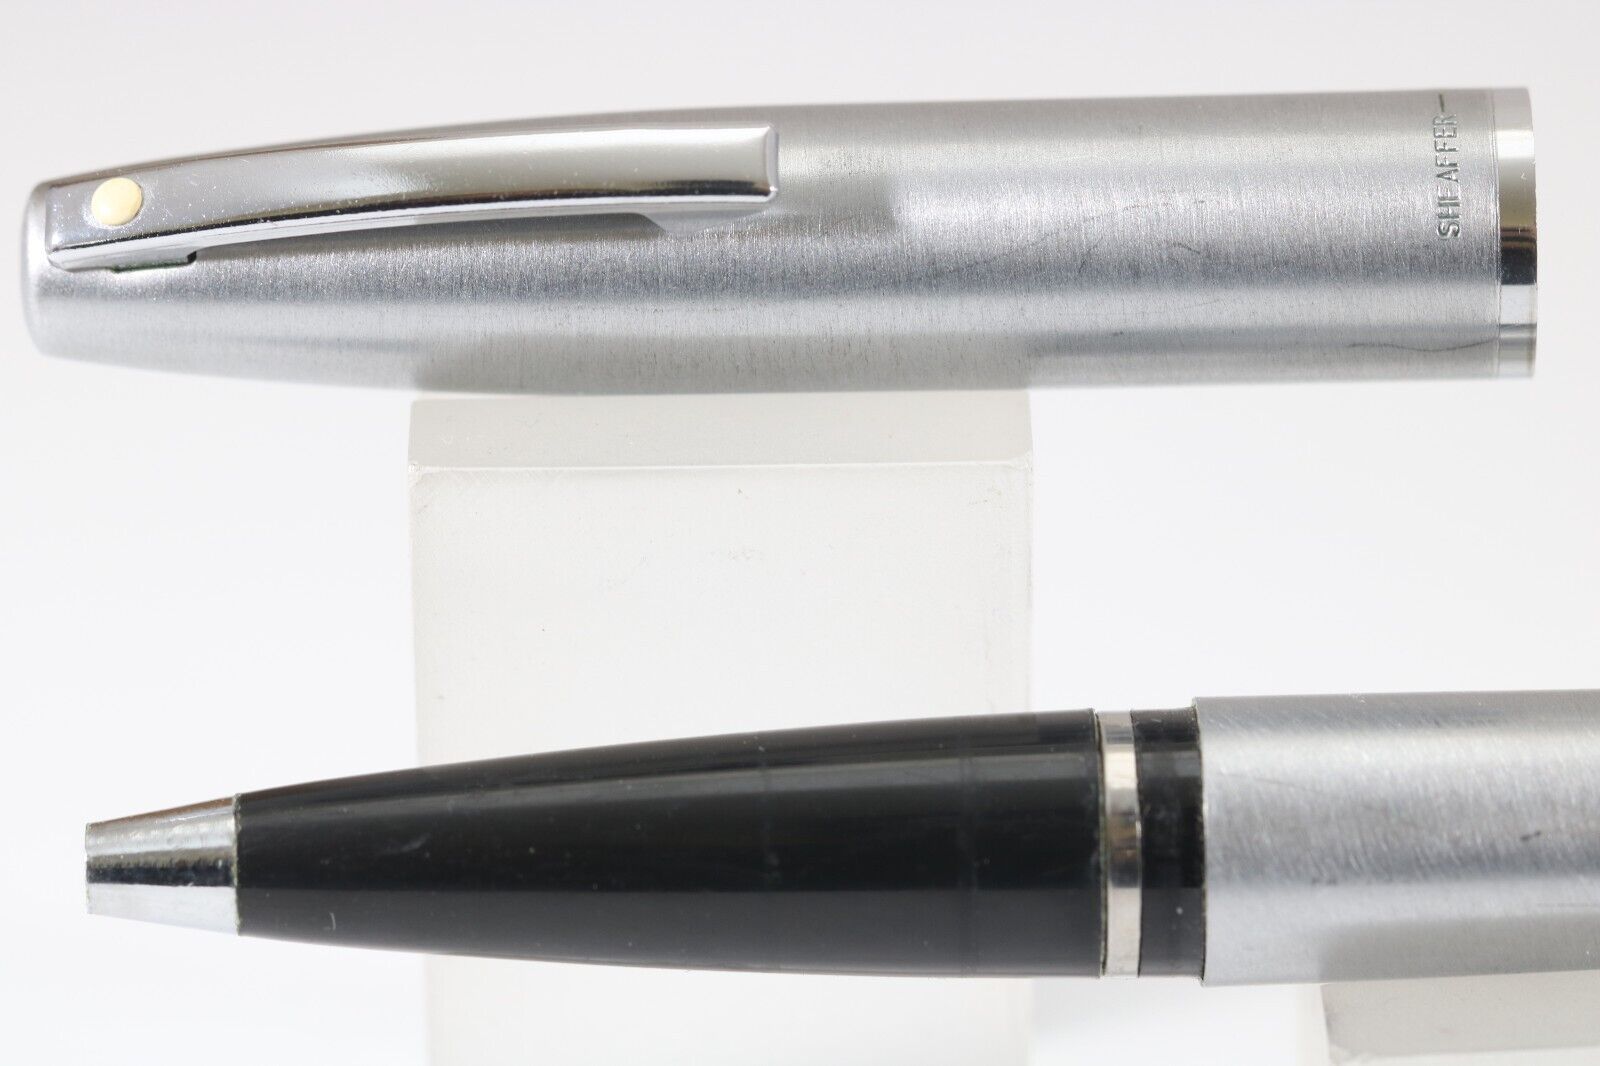 Vintage Sheaffer Triumph No. 444 Brushed Steel Rollerball Pen, CT